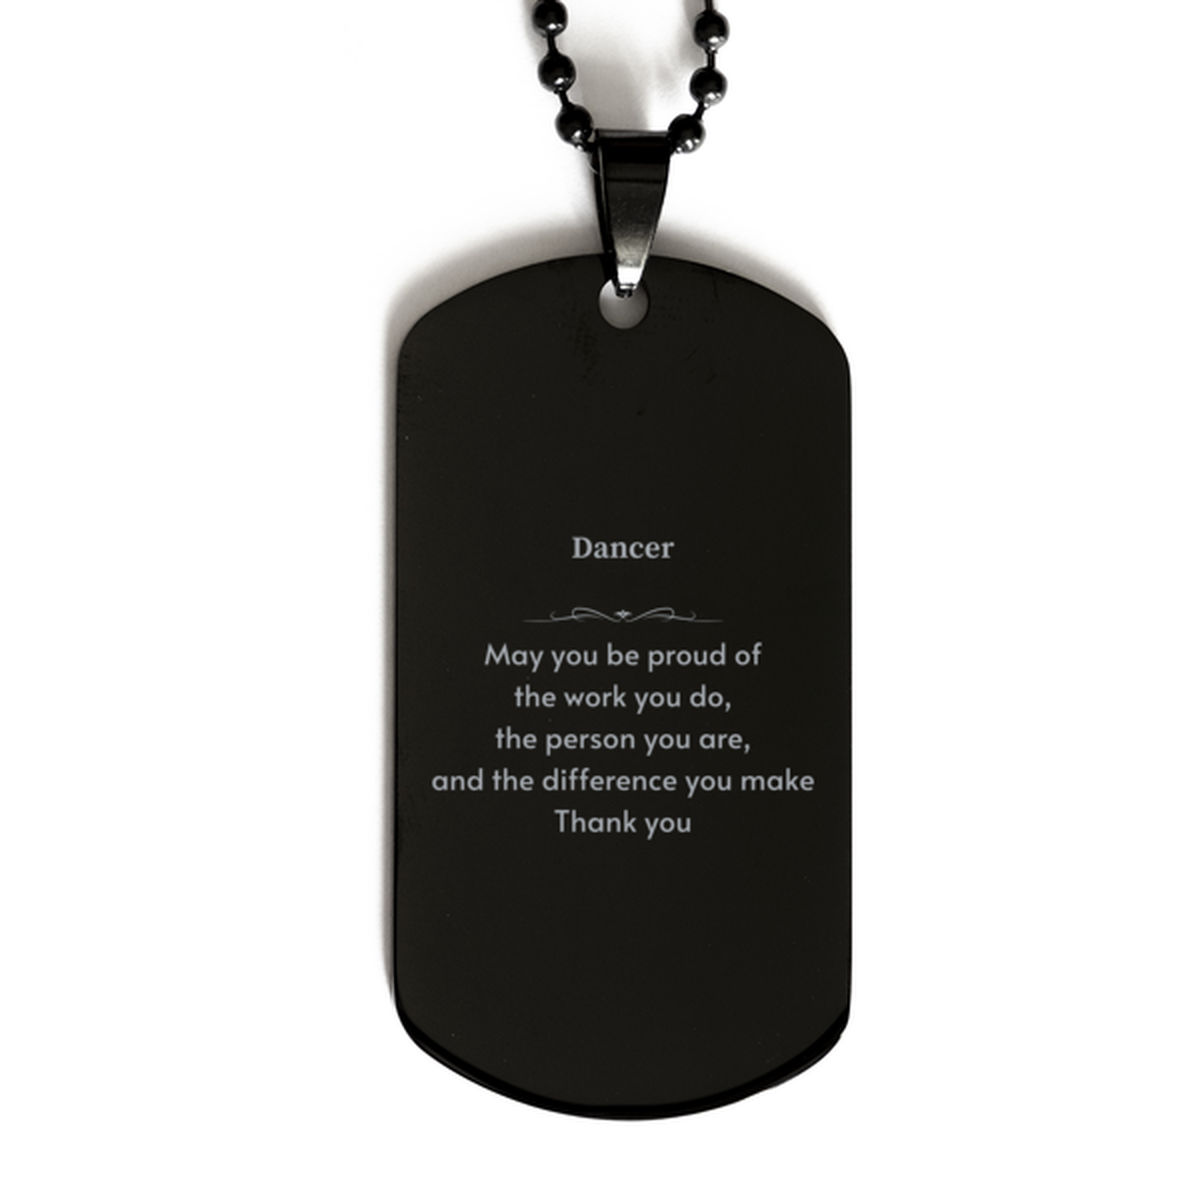 Heartwarming Black Dog Tag Retirement Coworkers Gifts for Dancer, Dancer May You be proud of the work you do, the person you are Gifts for Boss Men Women Friends